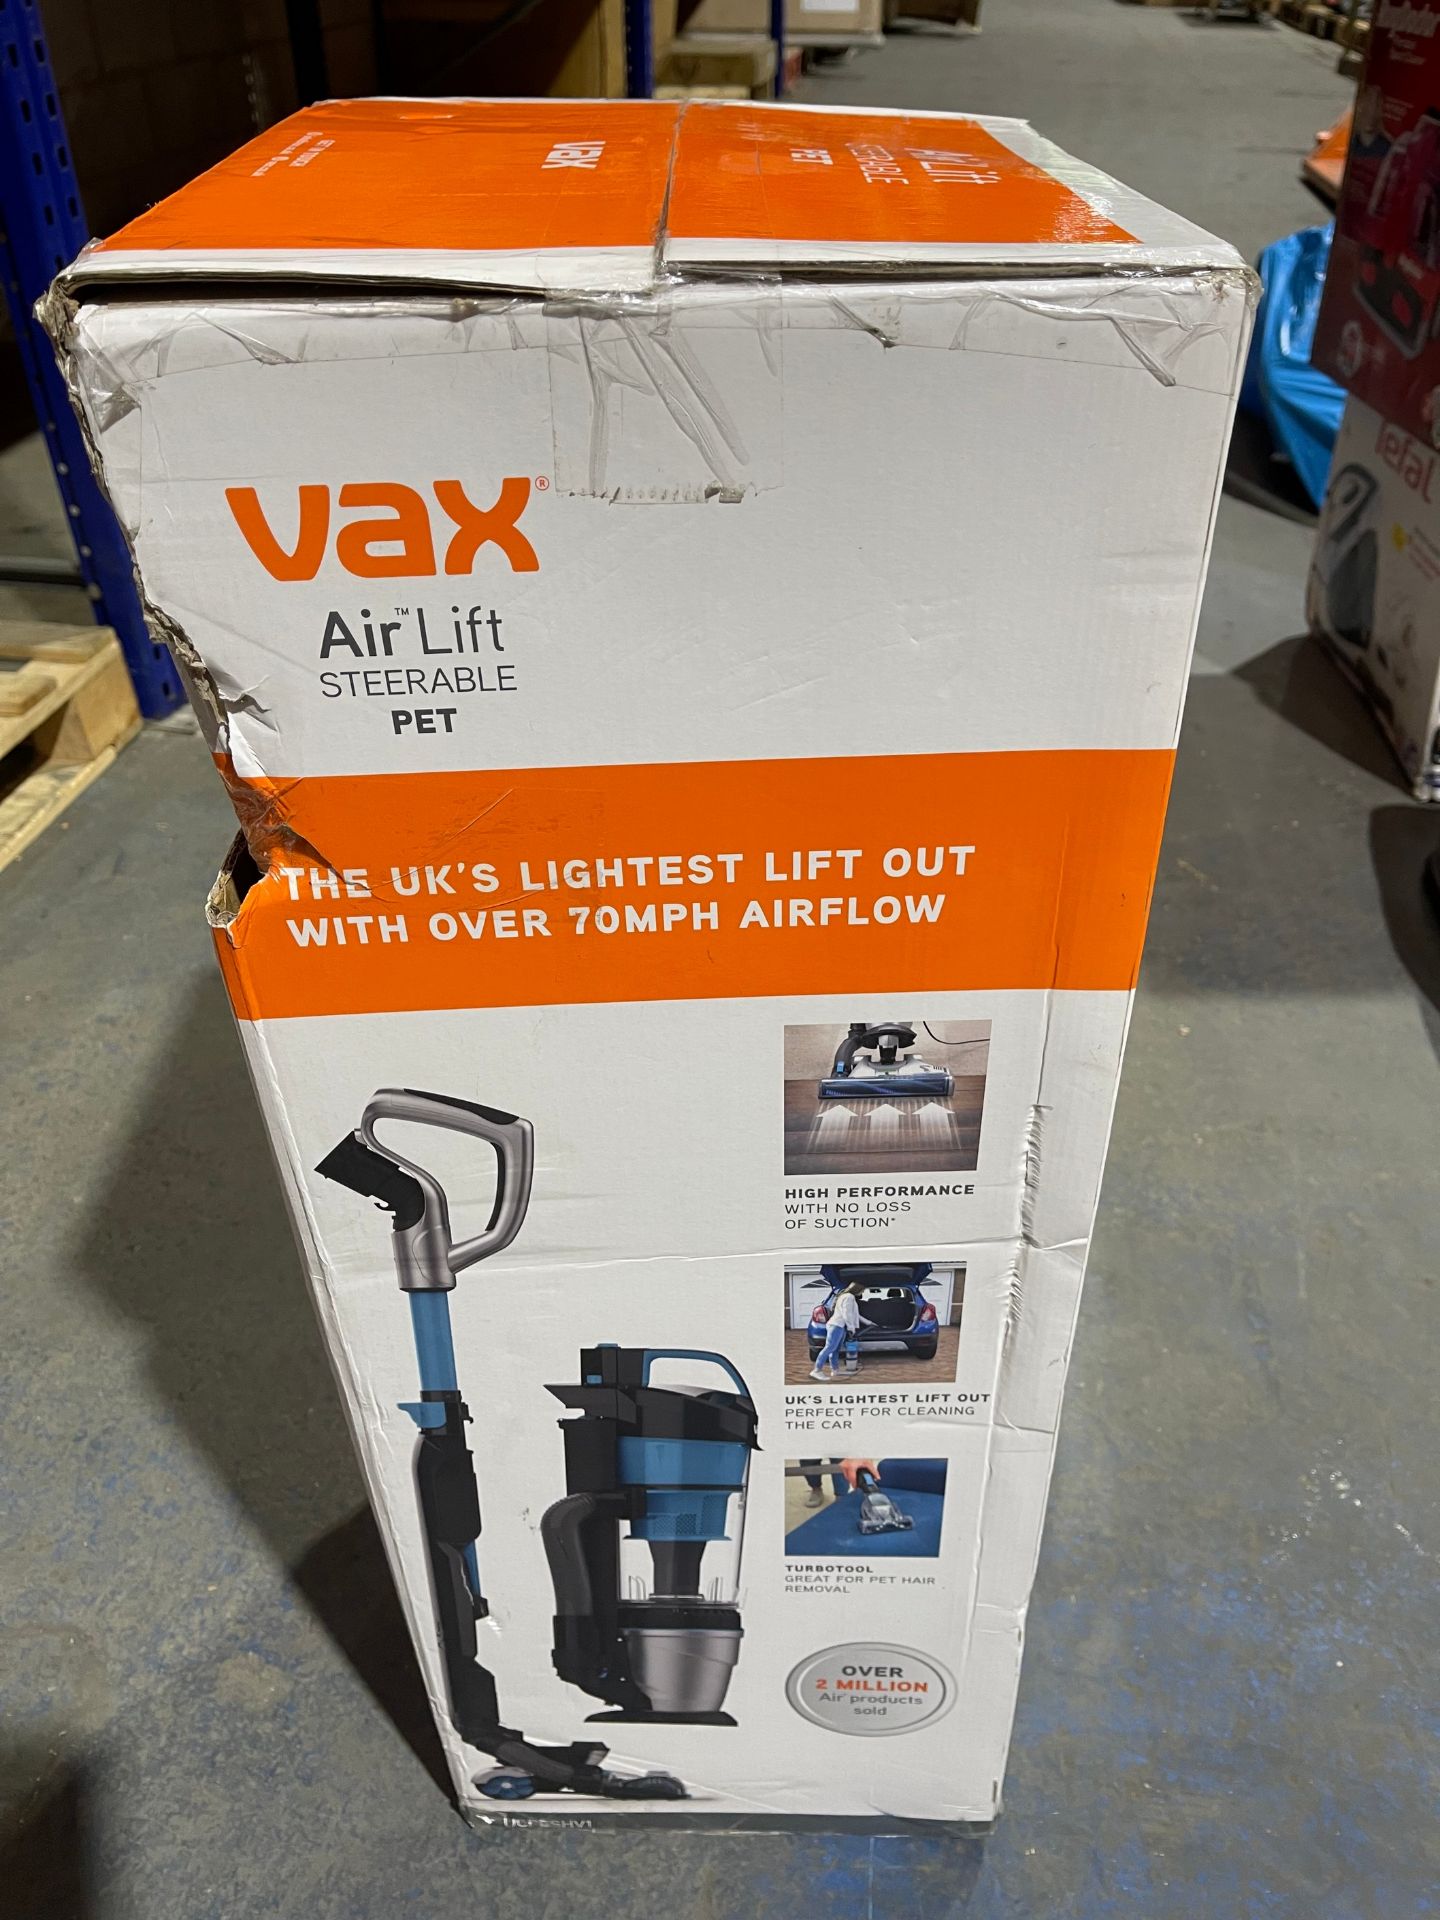 Vax UCPESHV1 Air Lift Steerable Pet Vacuum Cleaner, 1.5 Liters, Black/Blue Â£119.99Condition - Image 2 of 2